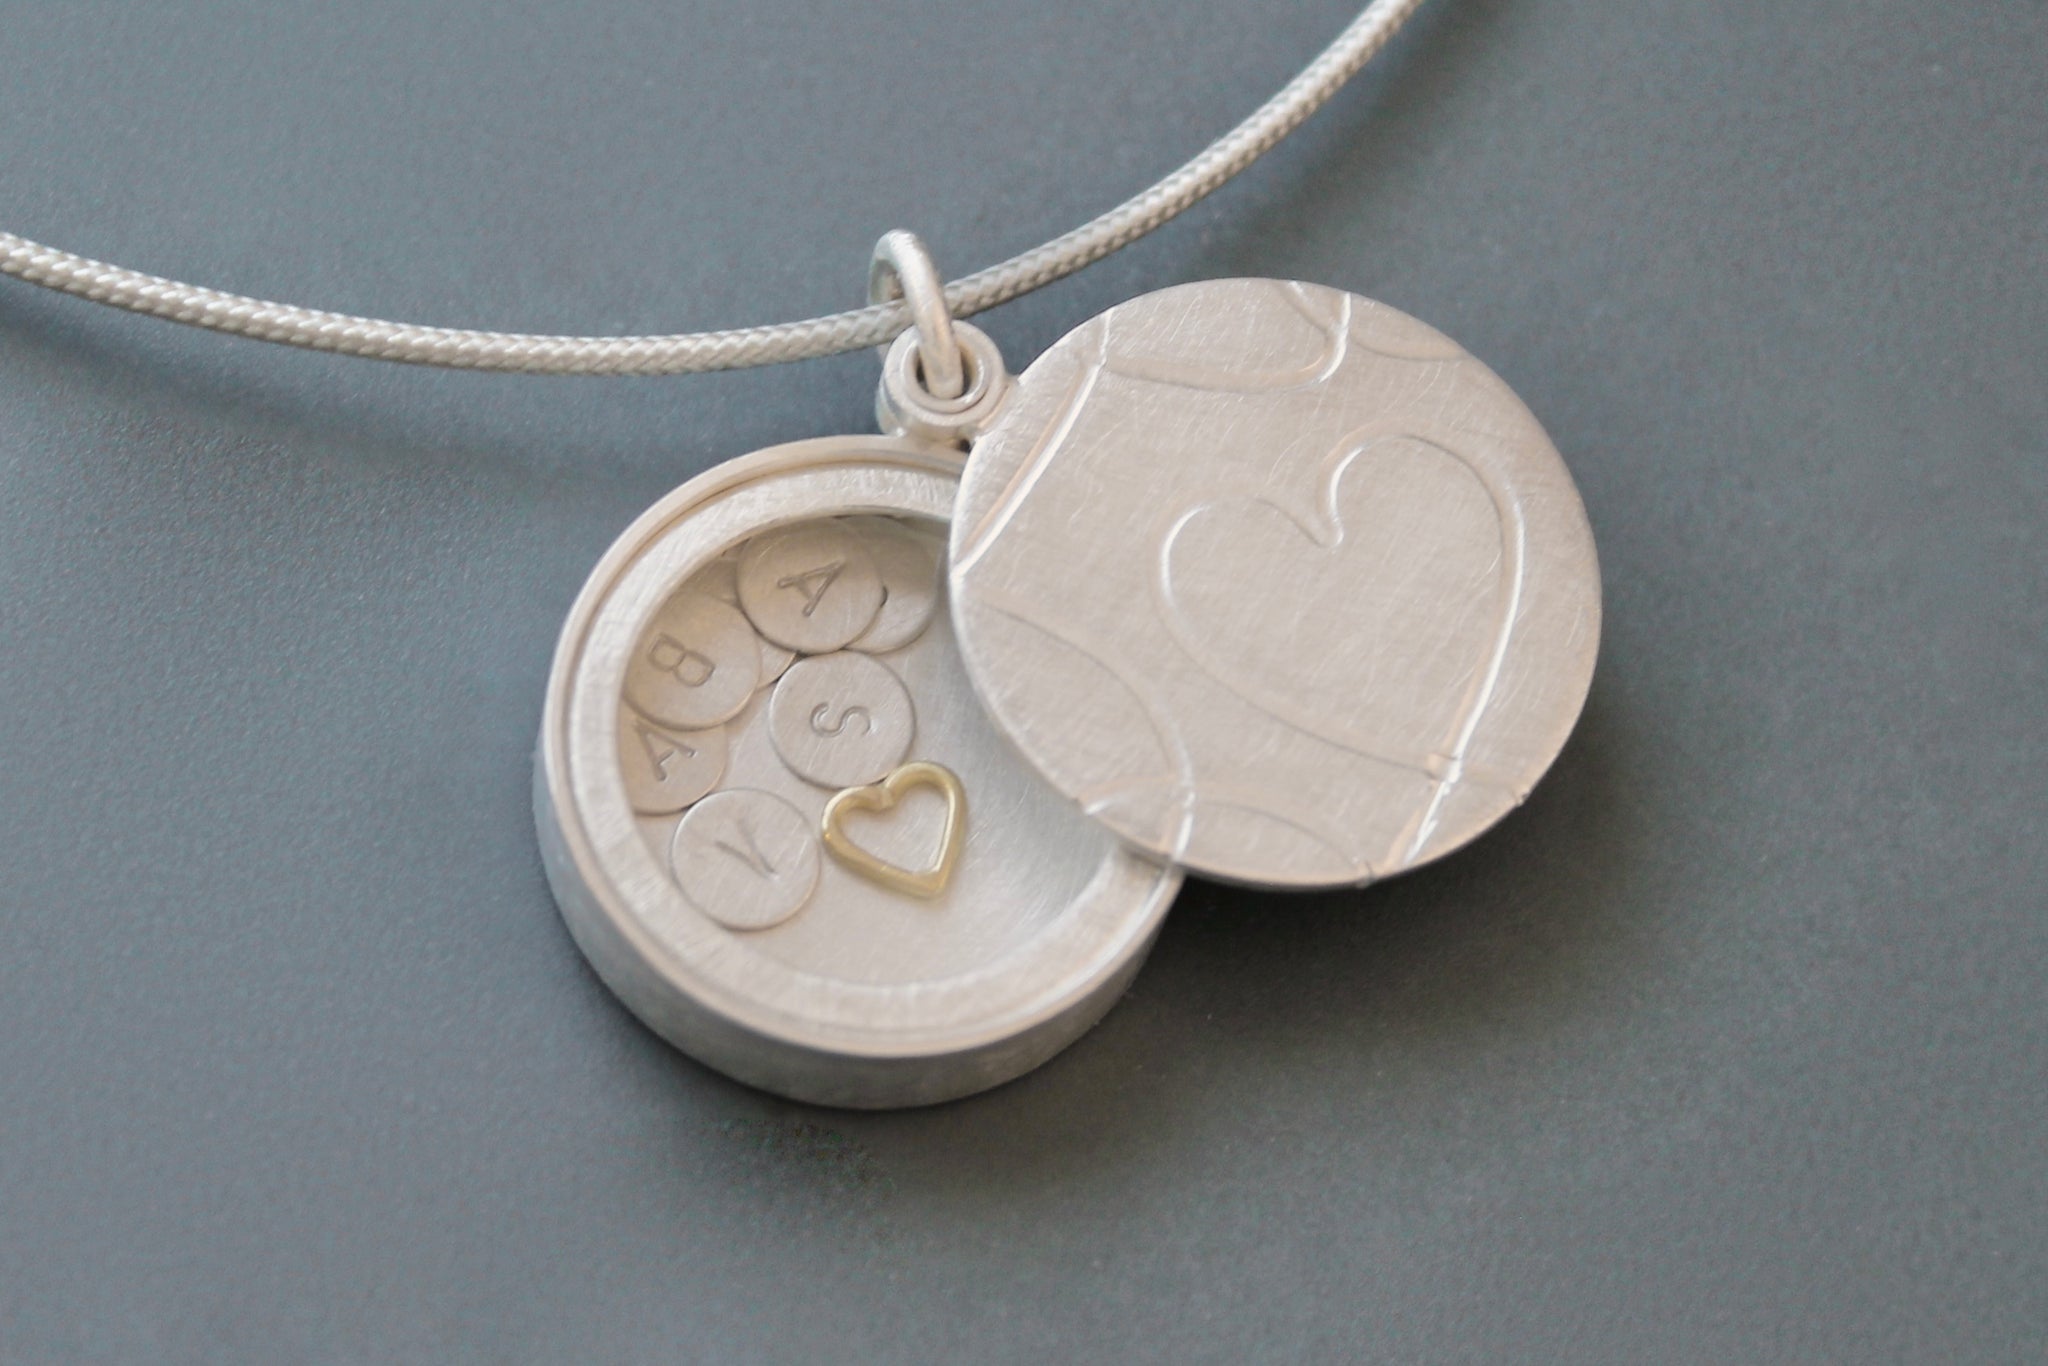 secret silver heart locket filled with letter plates and a golden heart